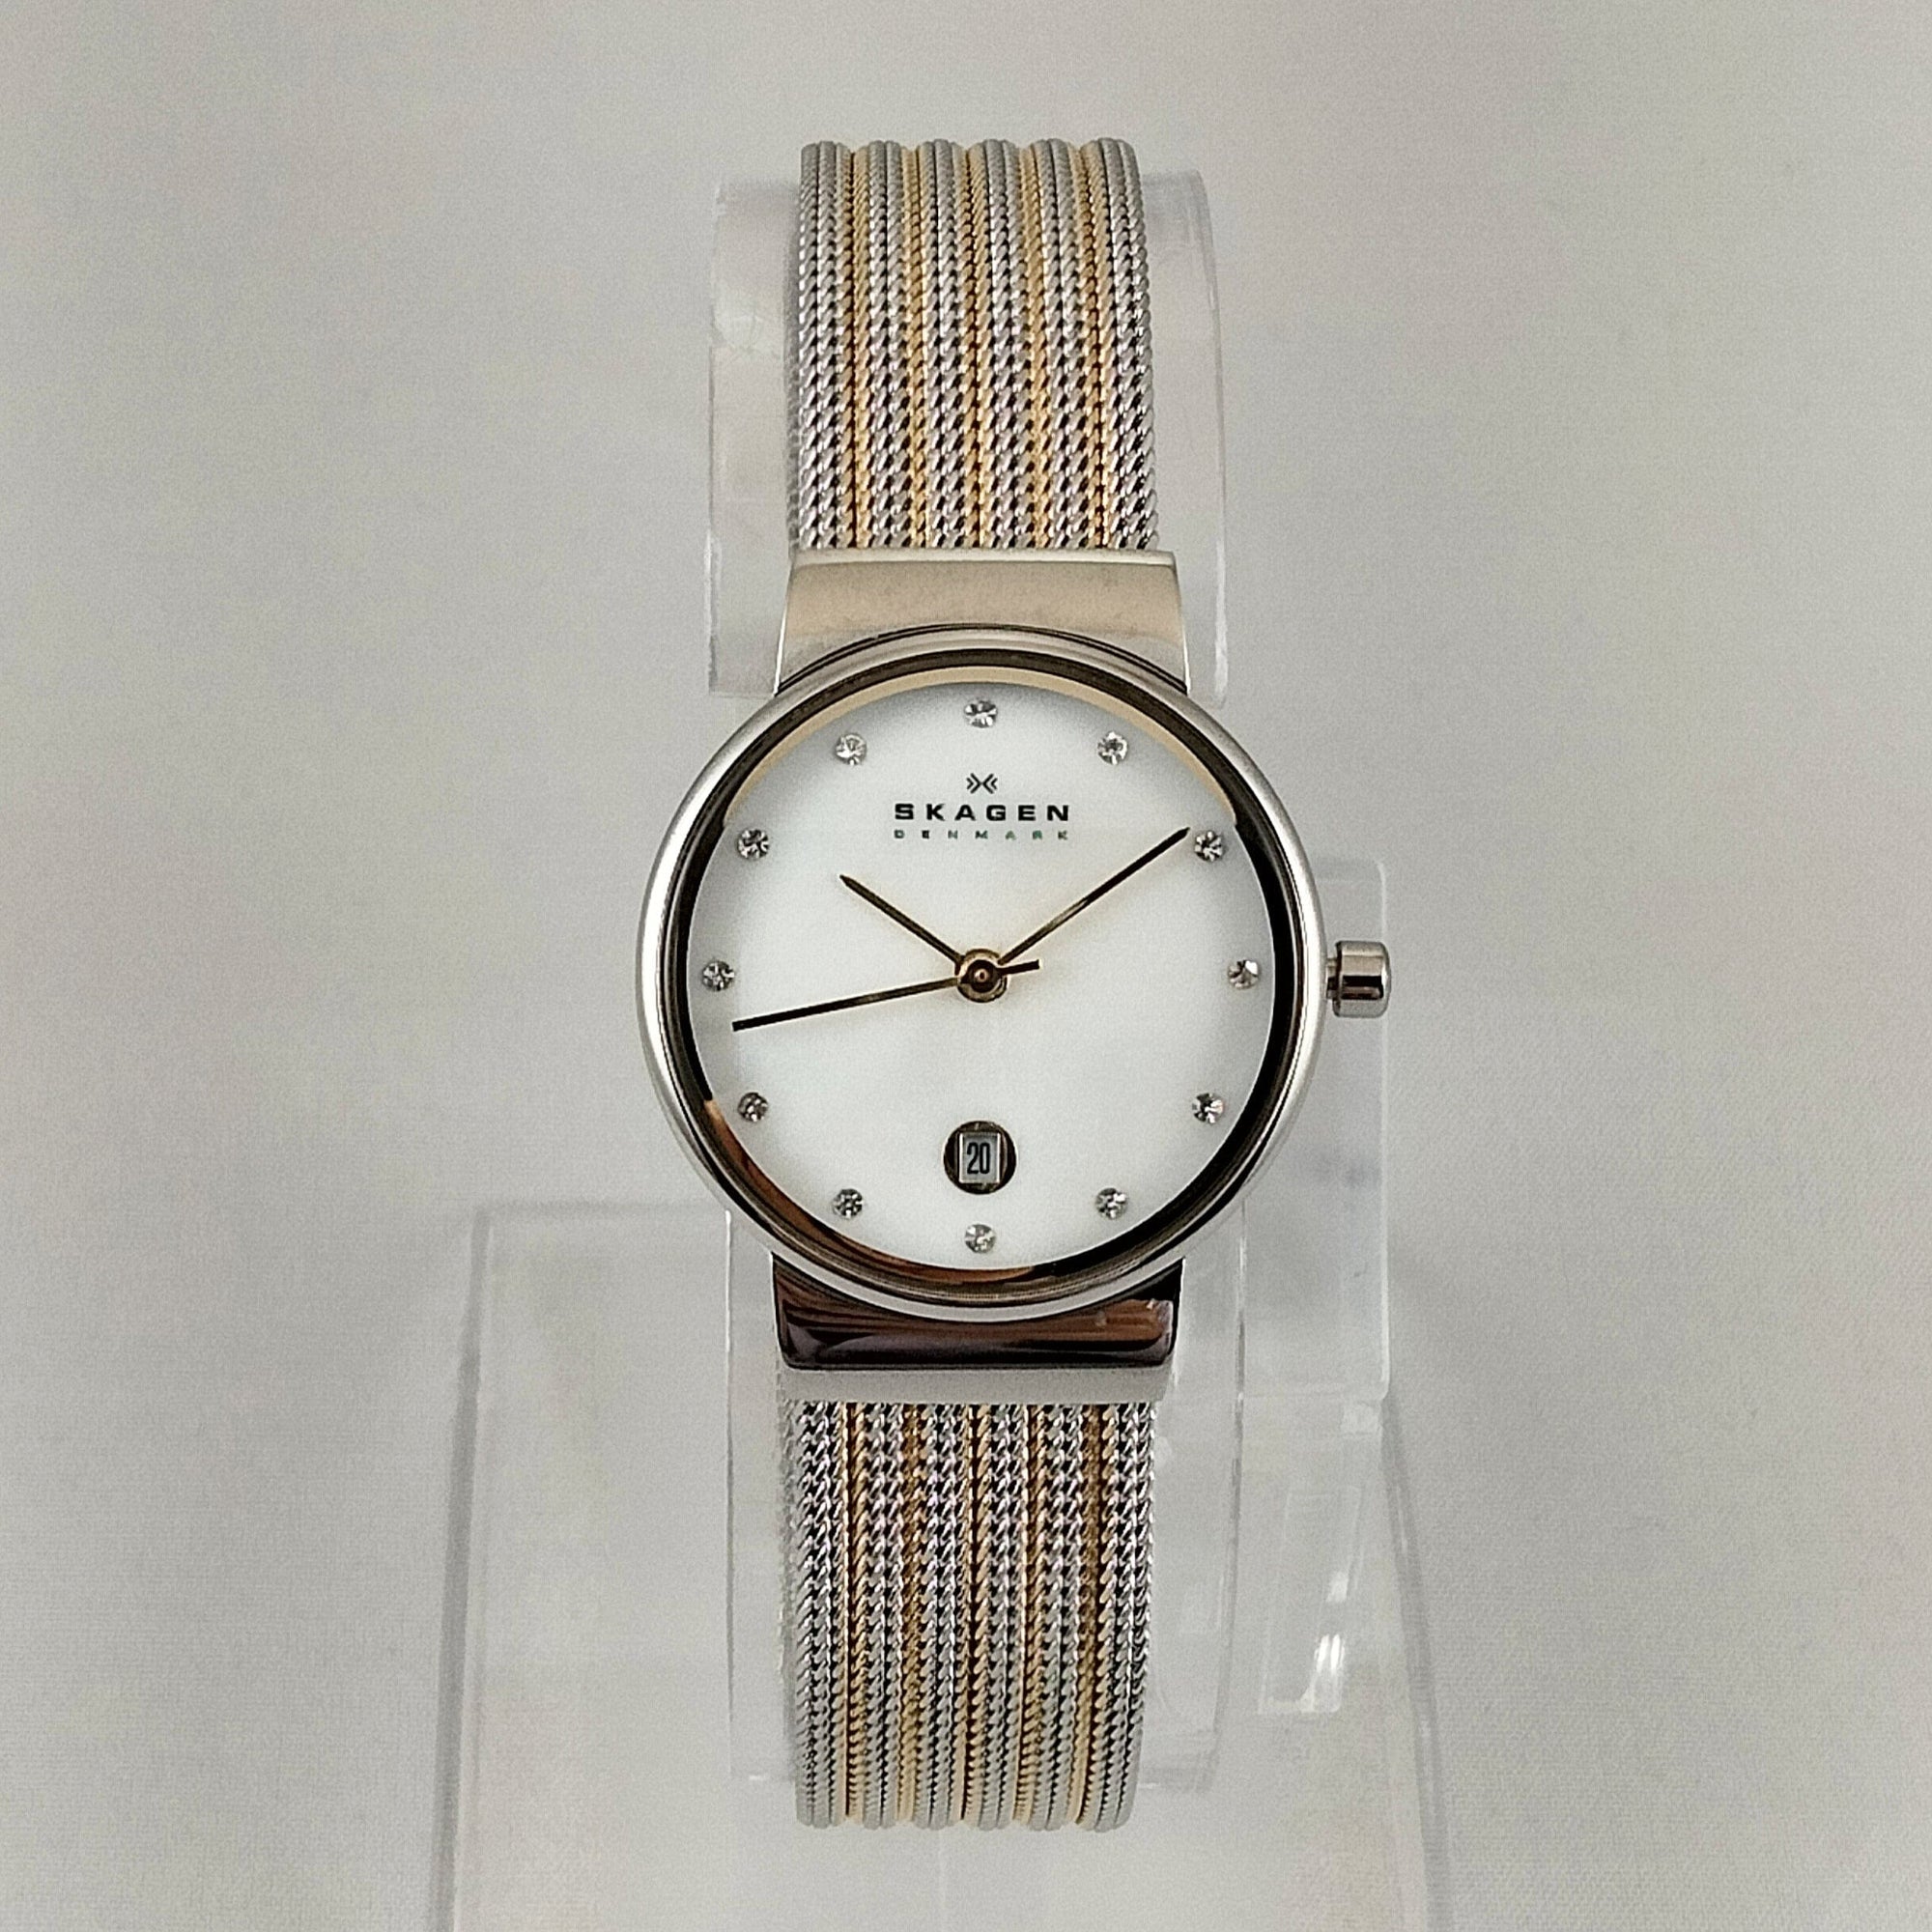 I Like Mikes Mid Century Modern Watches Skagen Women's Stainless Steel Watch, Mother of Pearl Dial, Jewel Hour Markers, Date Window, Gold Tone and Steel Mesh Strap